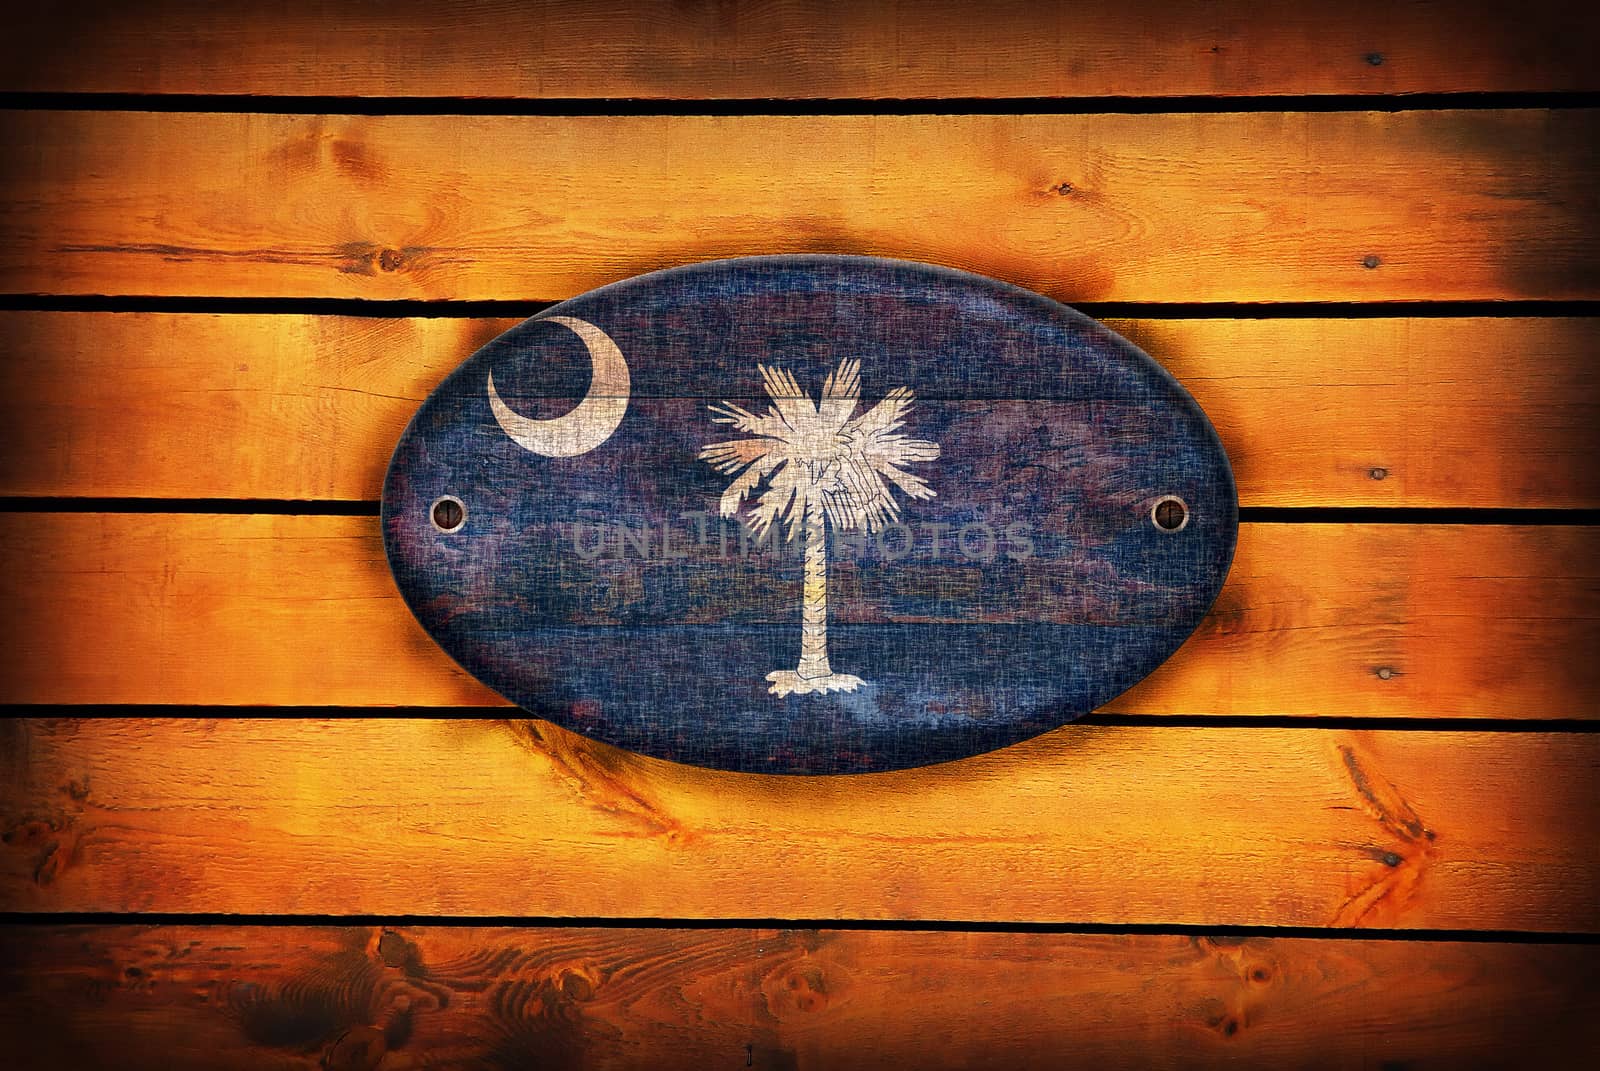 A South Carolina flag on brown wooden planks.